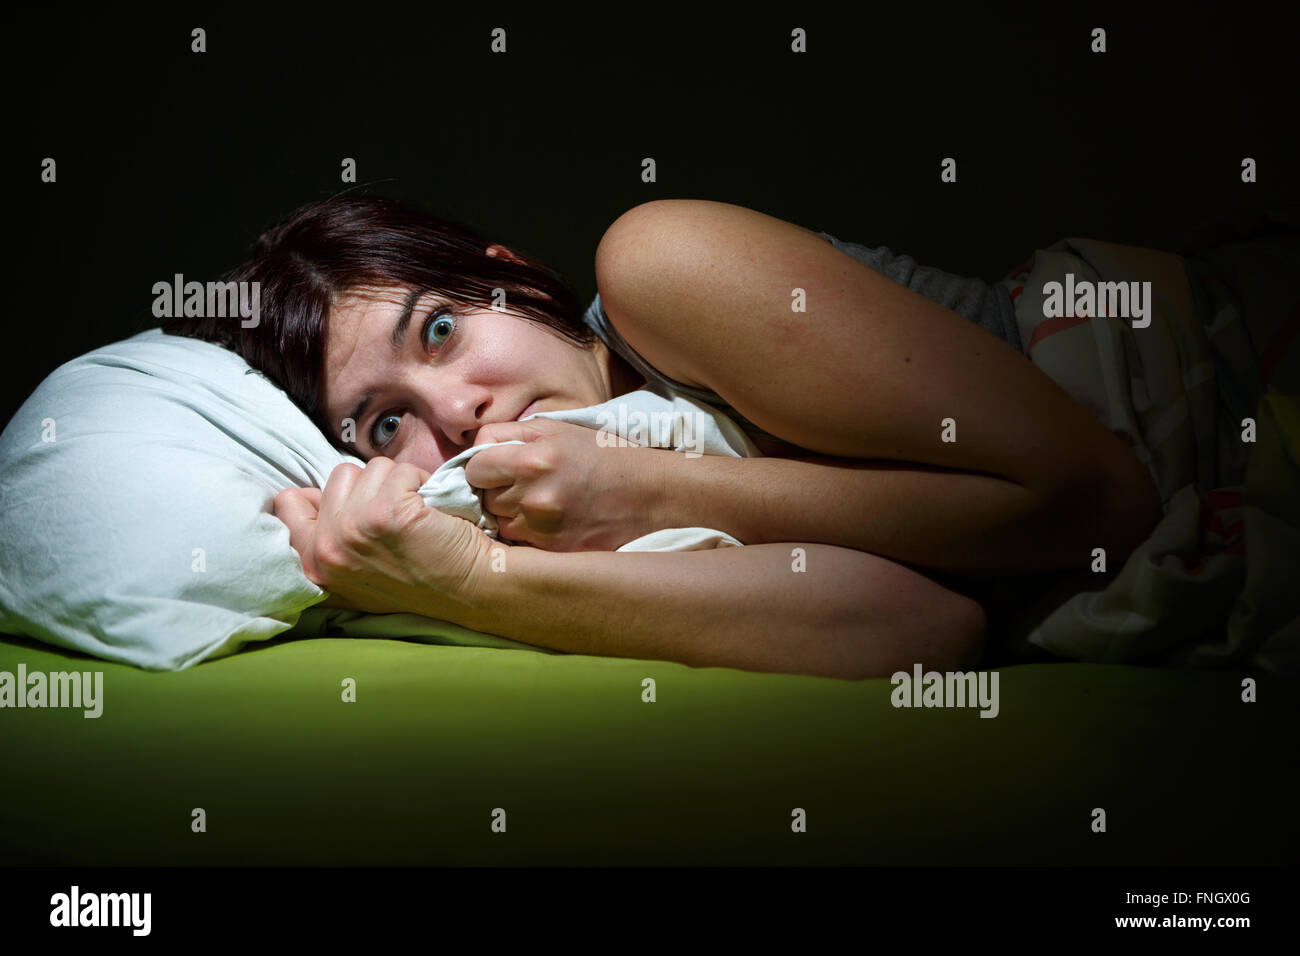 Young woman in bed with eyes opened suffering insomnia. Sleeping concept and nightmare issues Stock Photo